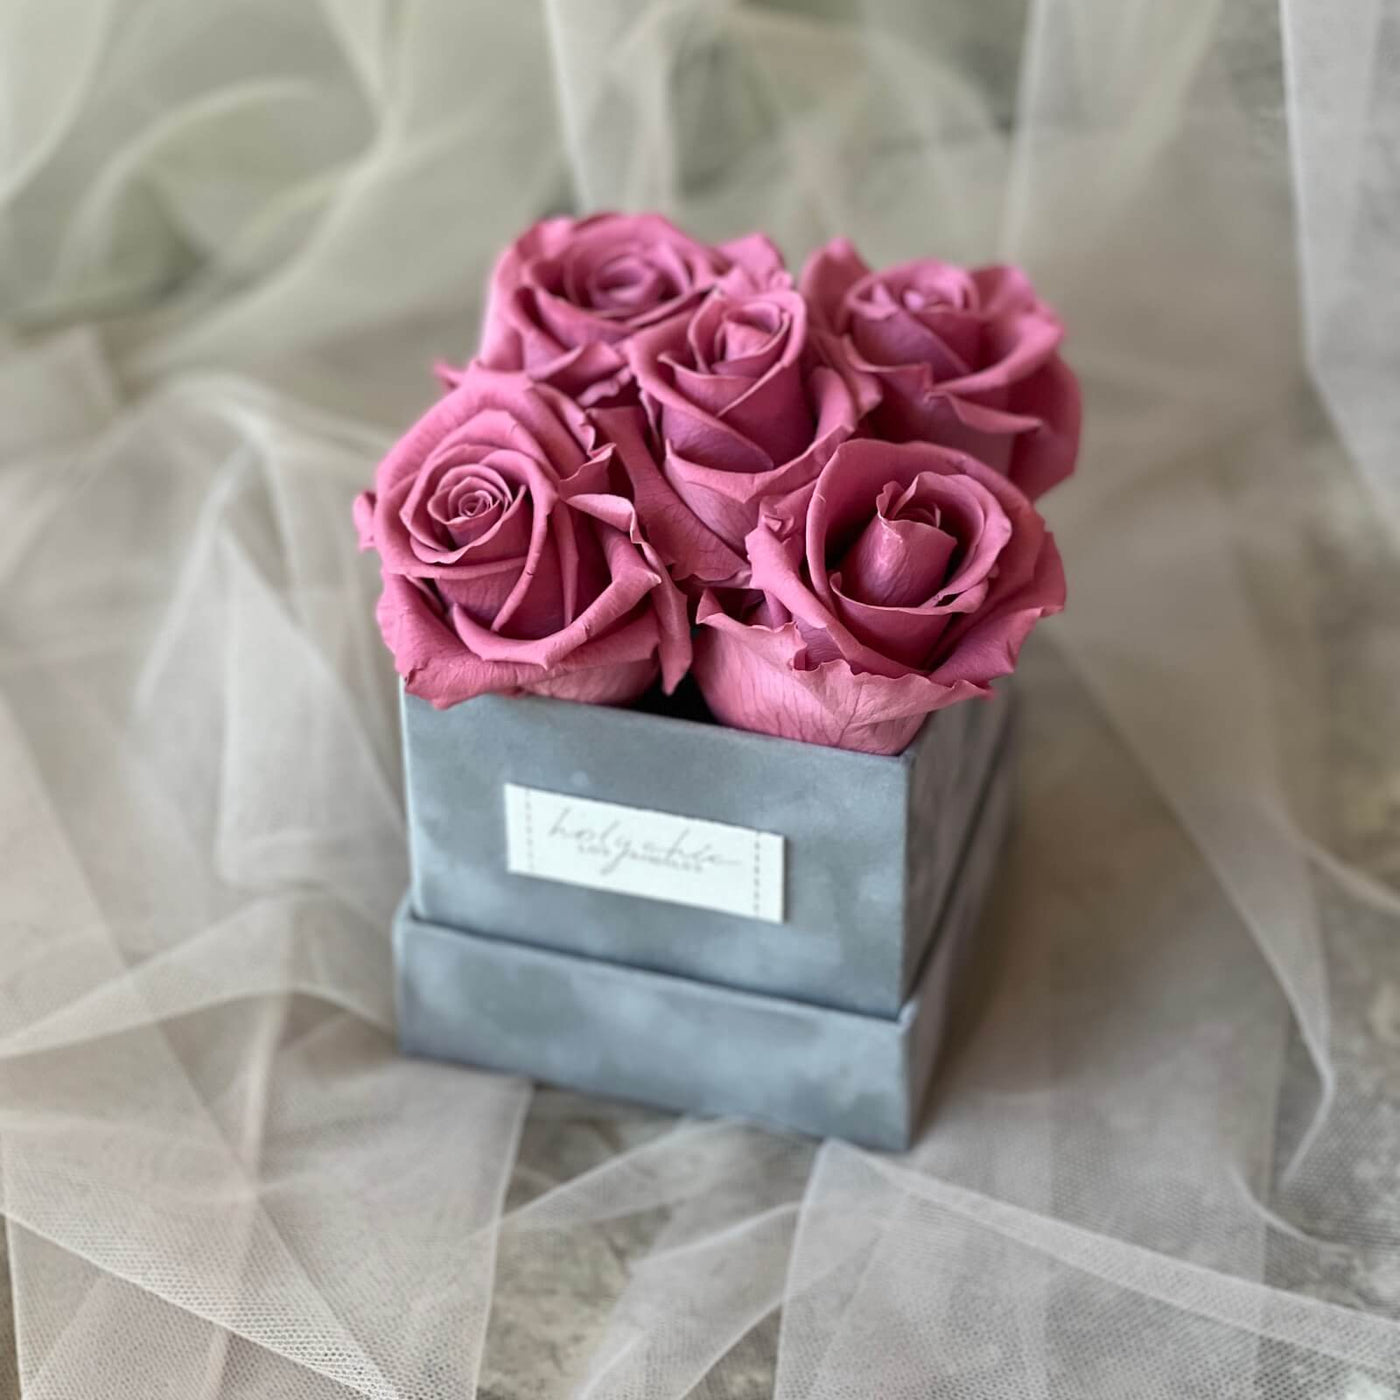 Chic Rose Hat Box - $95-$150 — Village Green Flowers & Gifts